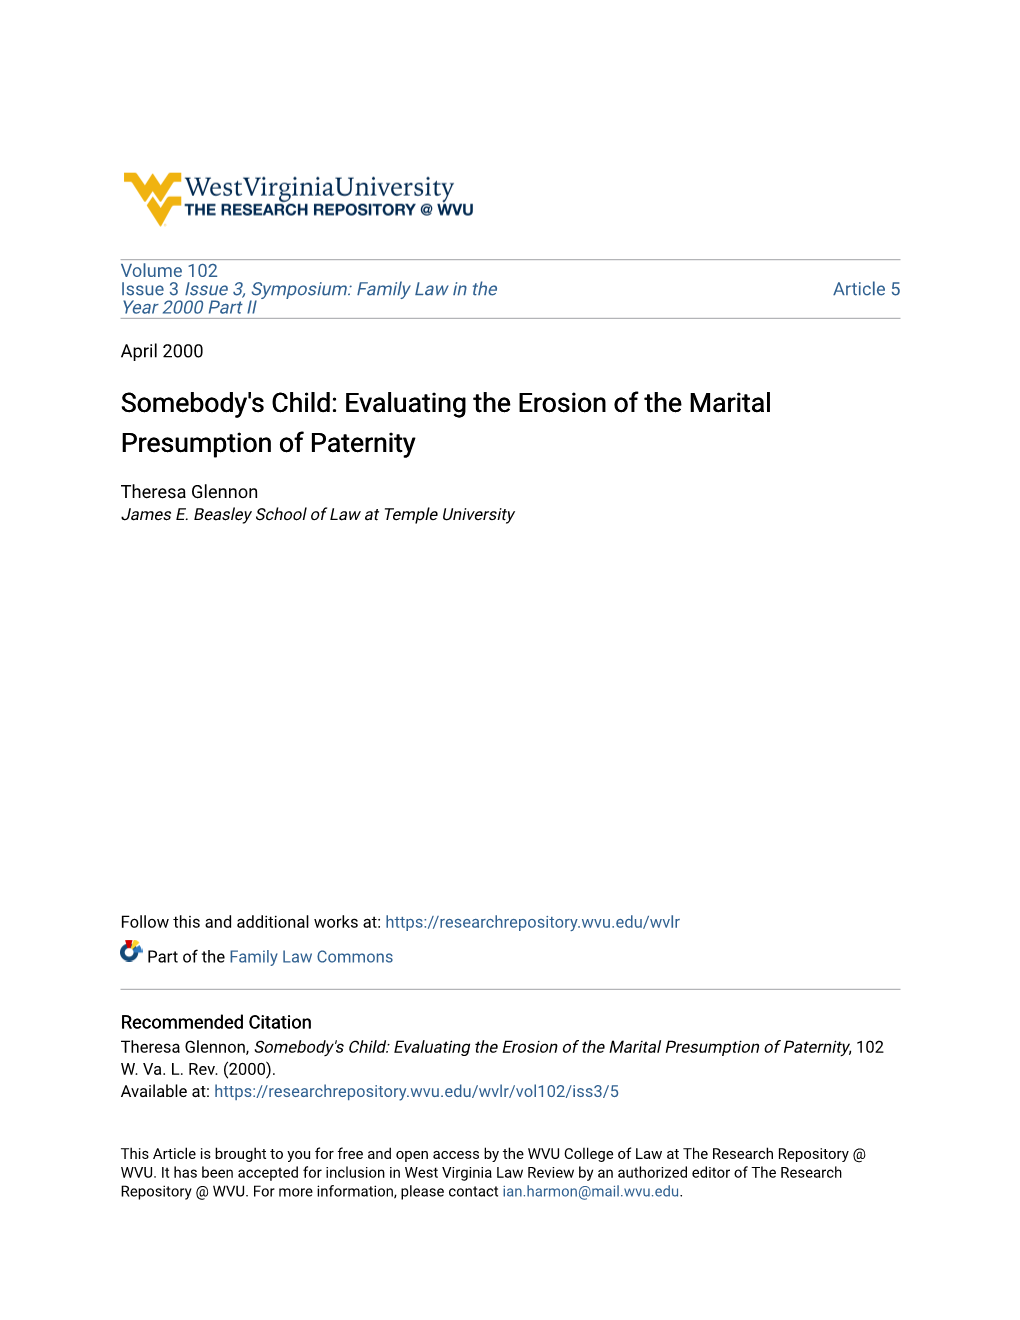 Evaluating the Erosion of the Marital Presumption of Paternity